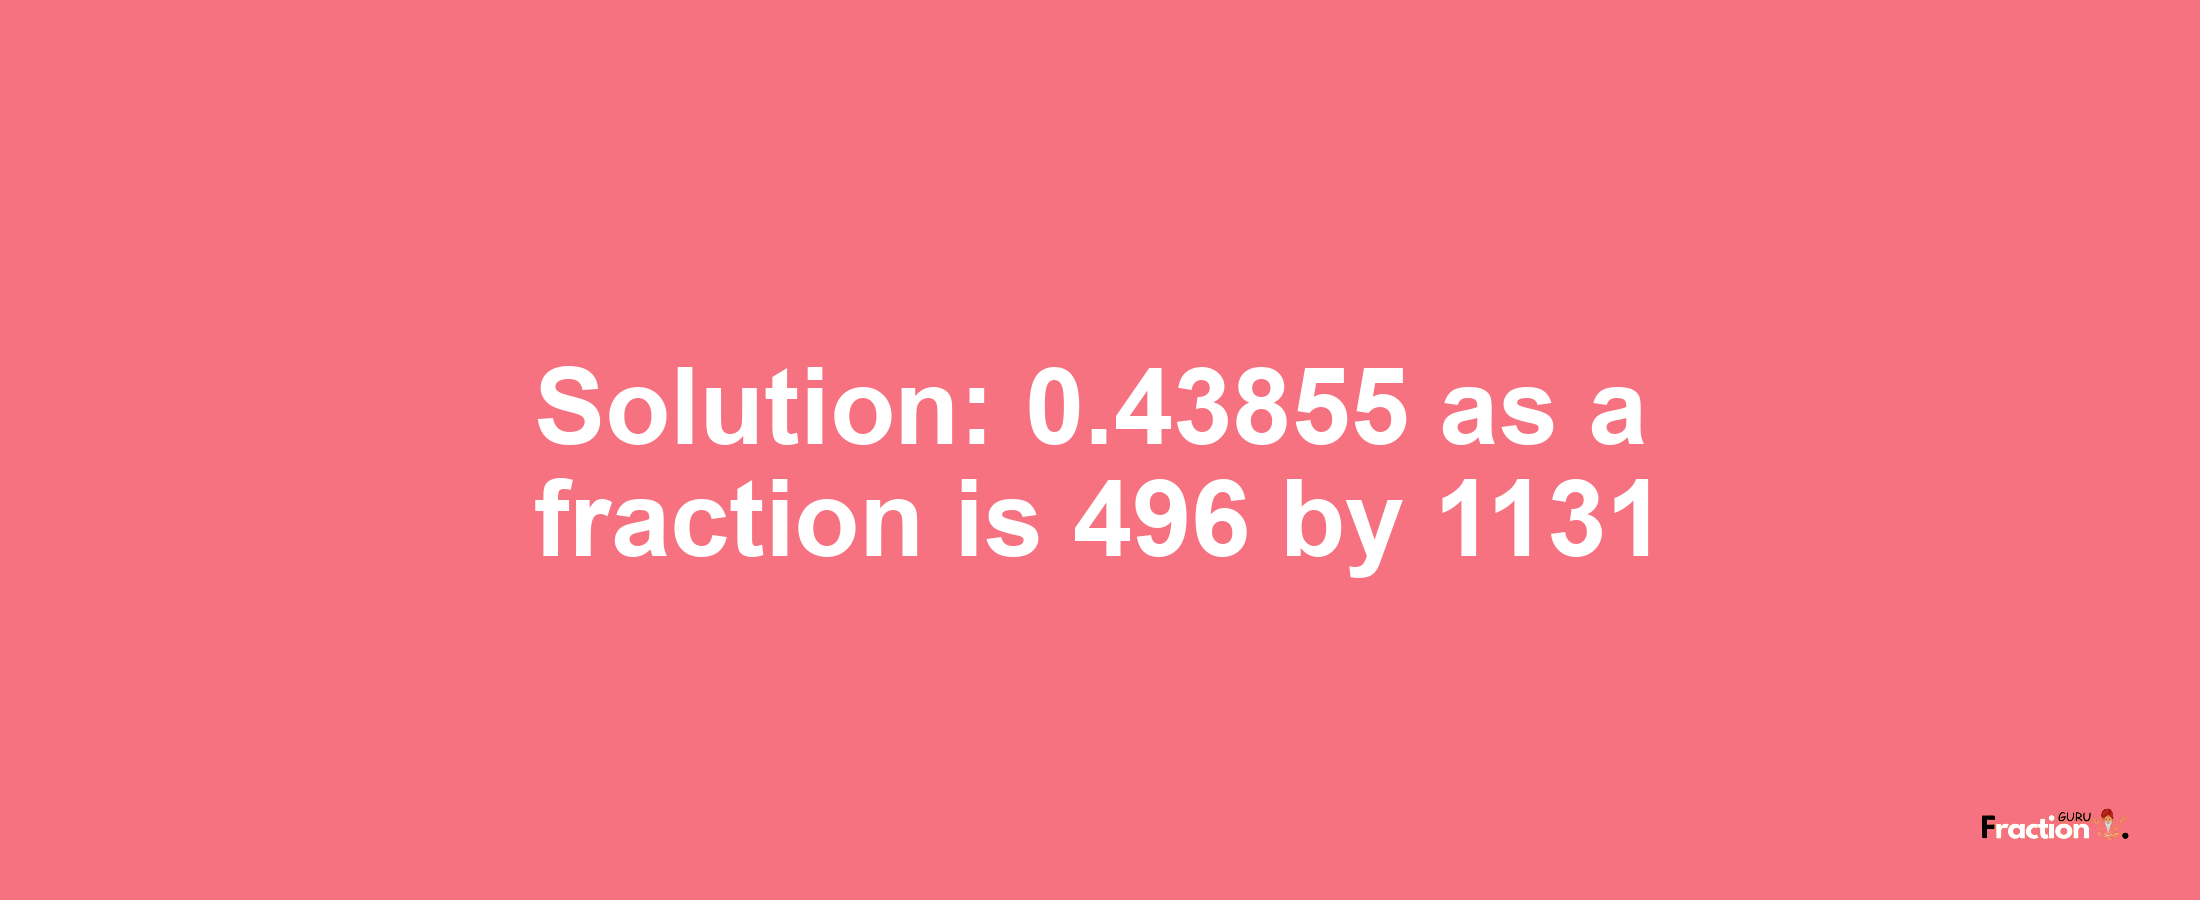 Solution:0.43855 as a fraction is 496/1131